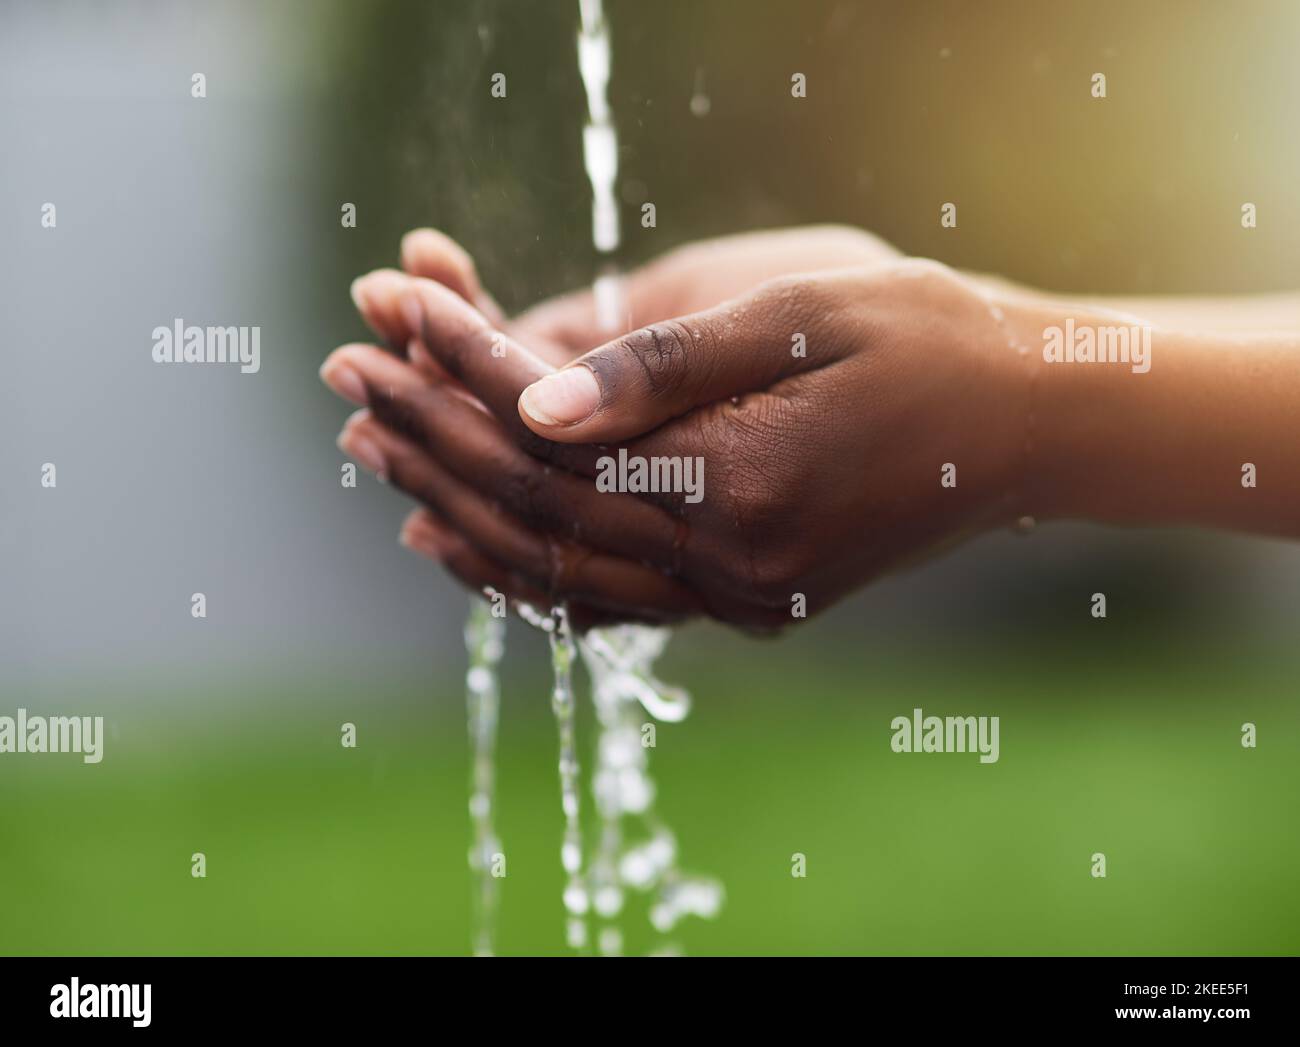 The worth of water is priceless. a woman washing her hands outdoors. Stock Photo